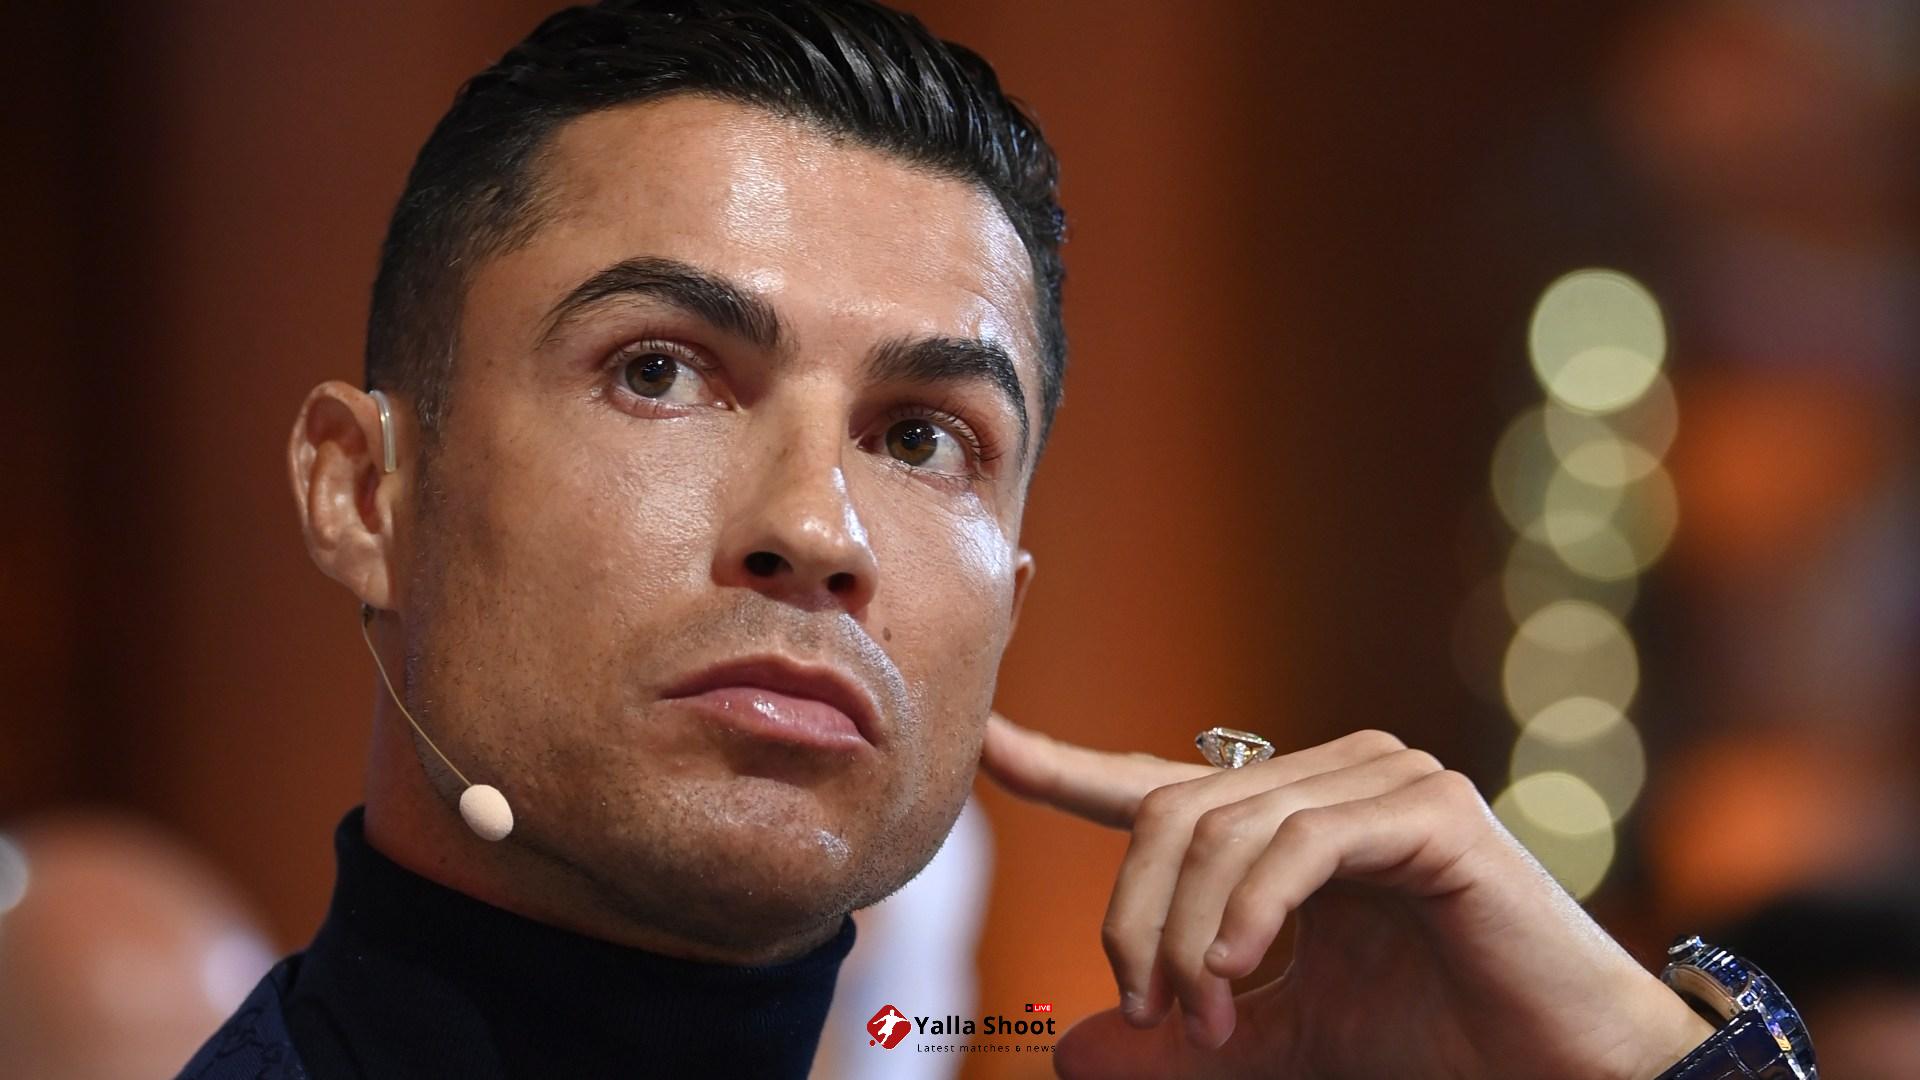 'I no longer believe in them' - Ronaldo blasts awards claiming he's unappreciated after rival Messi scoops biggest gongs